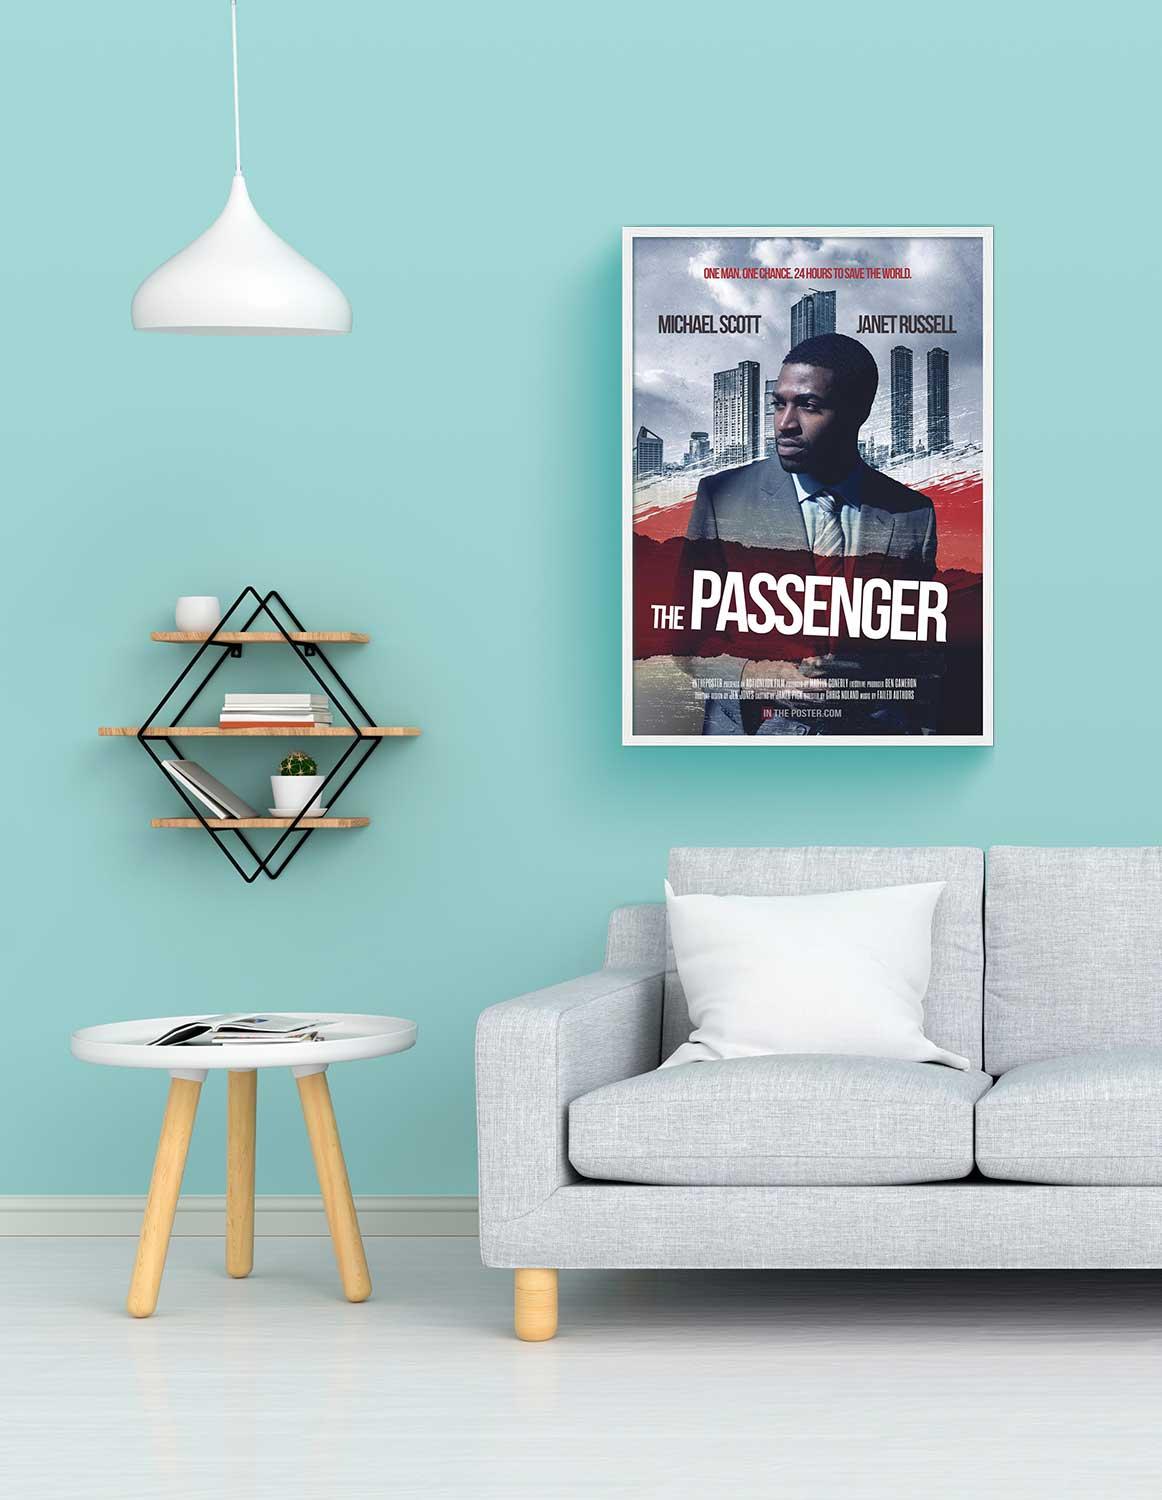 The thiller movie poster in a white frame on a blue wall above a sofa